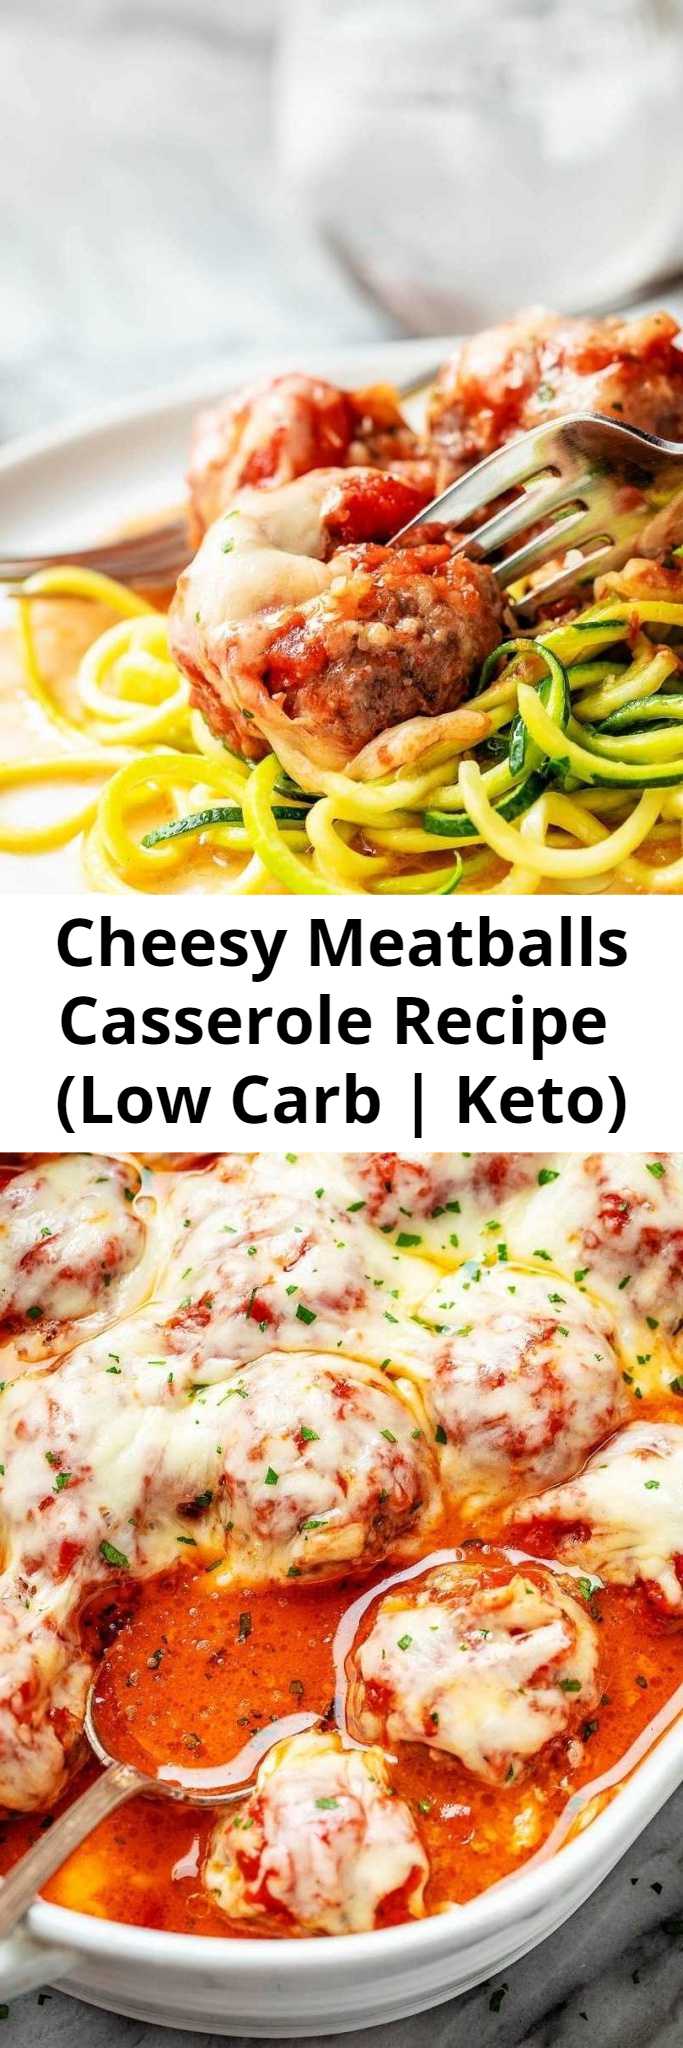 Cheesy Meatballs Casserole Recipe (Low Carb | Keto) - Looking for a great low carb dinner option? This low carb turkey meatball casserole recipe is absolutely fabulous. #lowcarb #meatballs #recipe